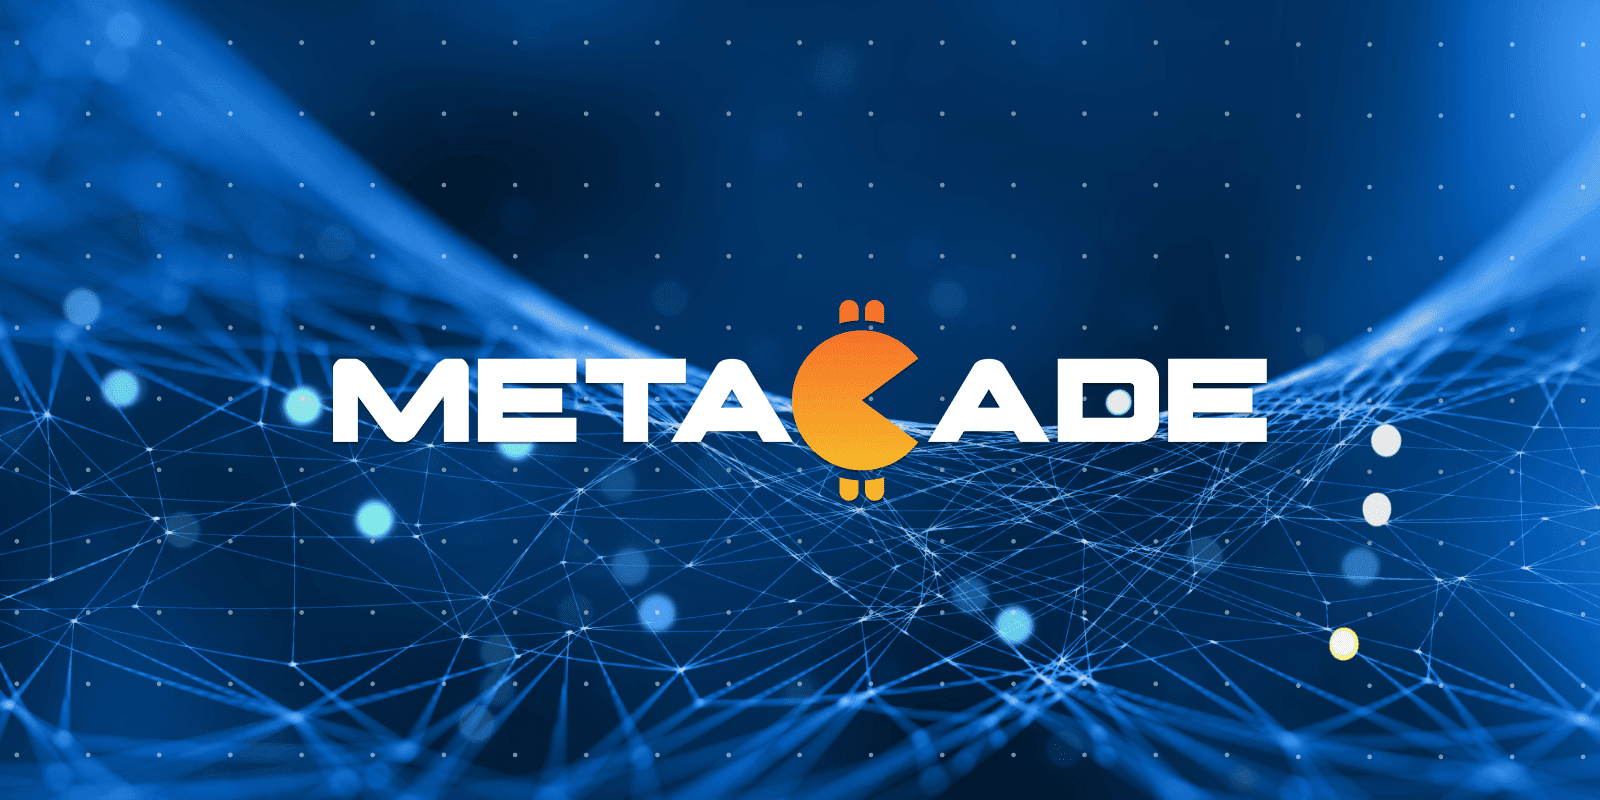 Metacade Could Triple Its Price in Presale, Experts Predict